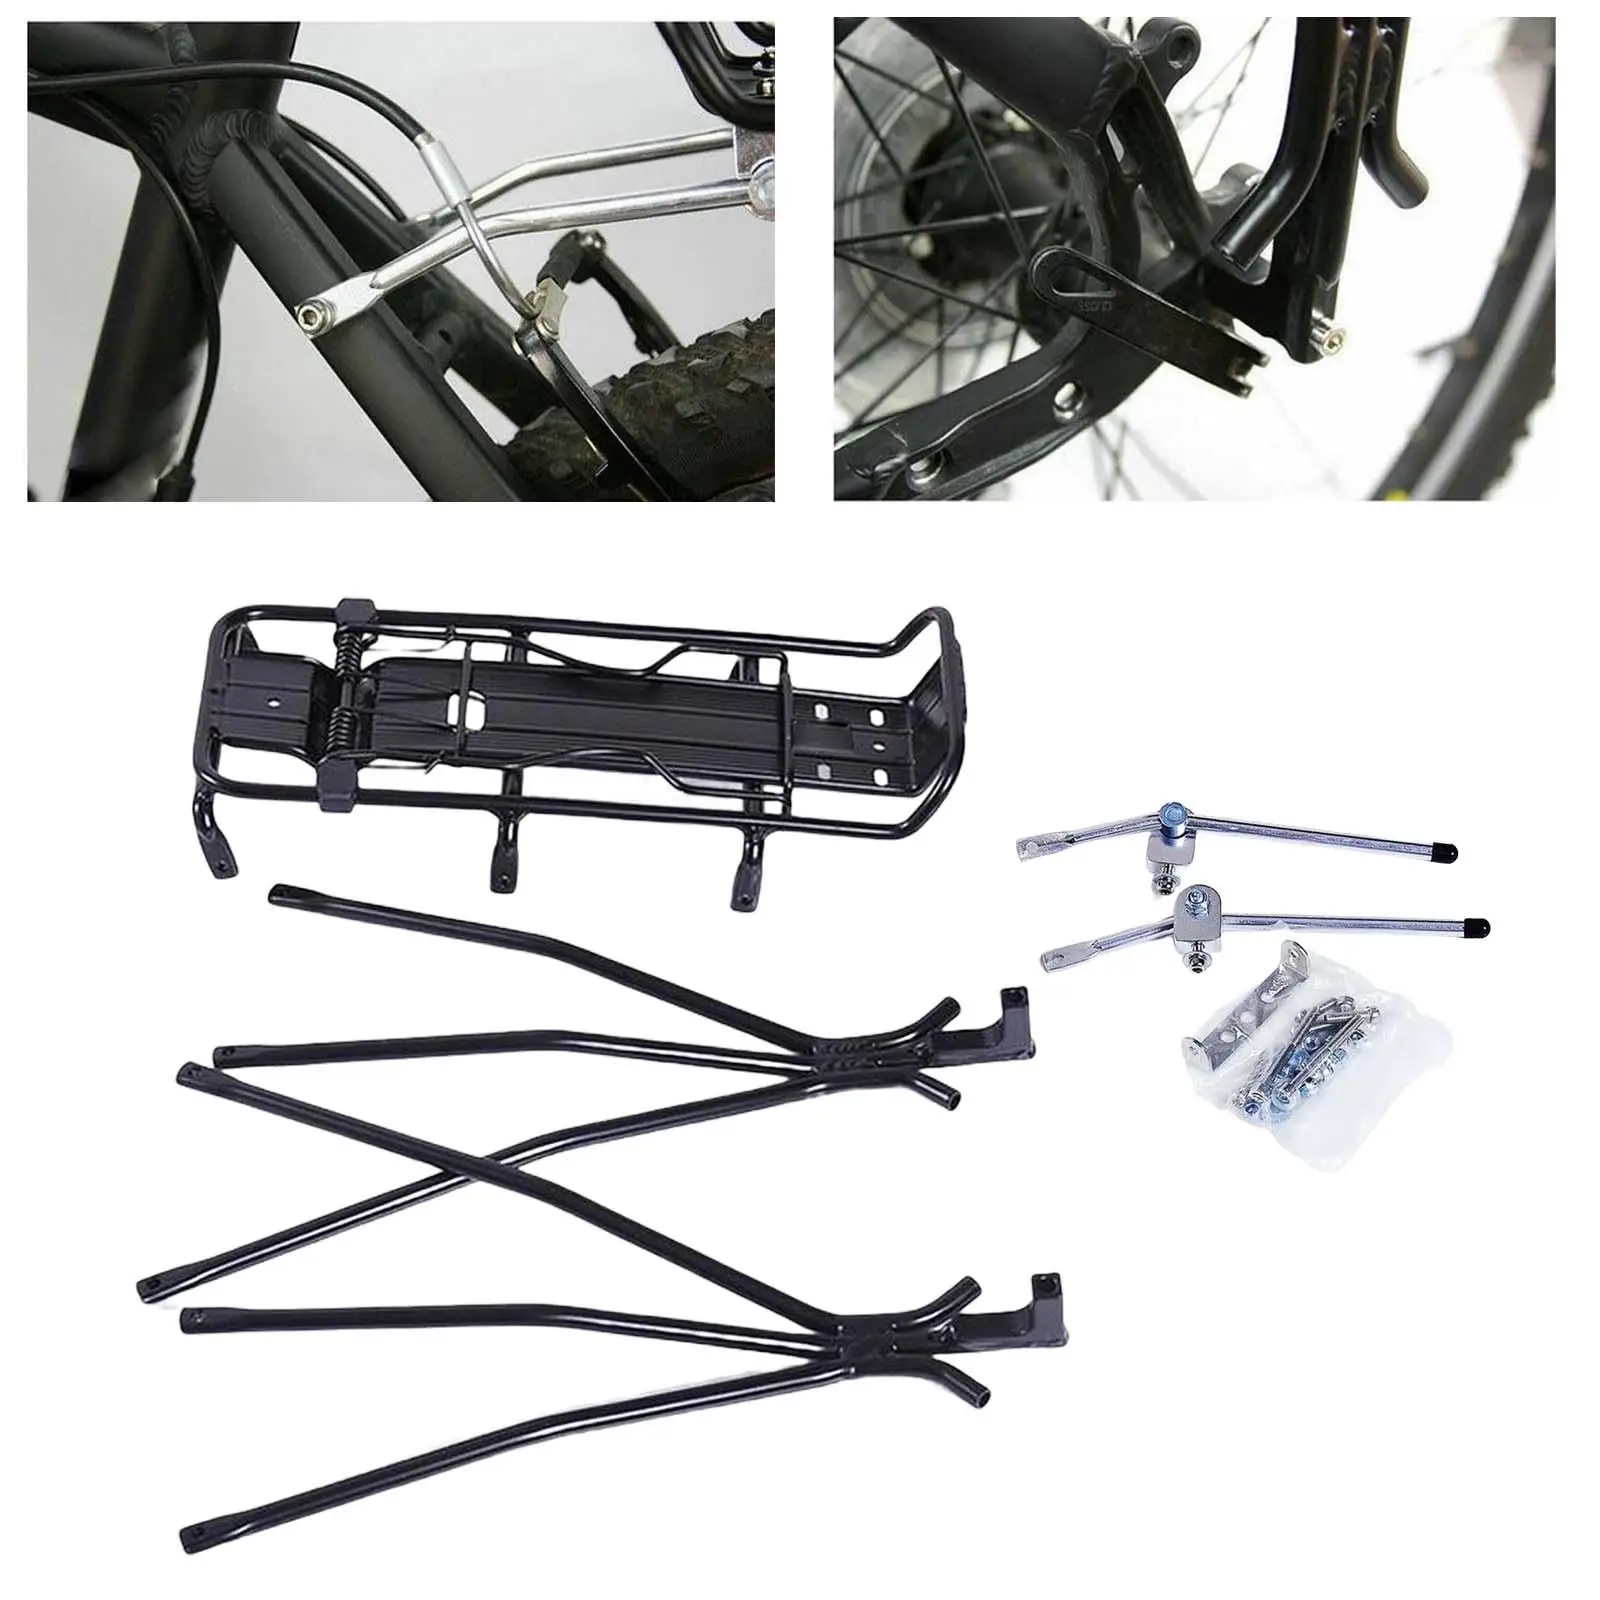 Mountain Road Rear Carrier Rack Pannier Rack Touring Carrying